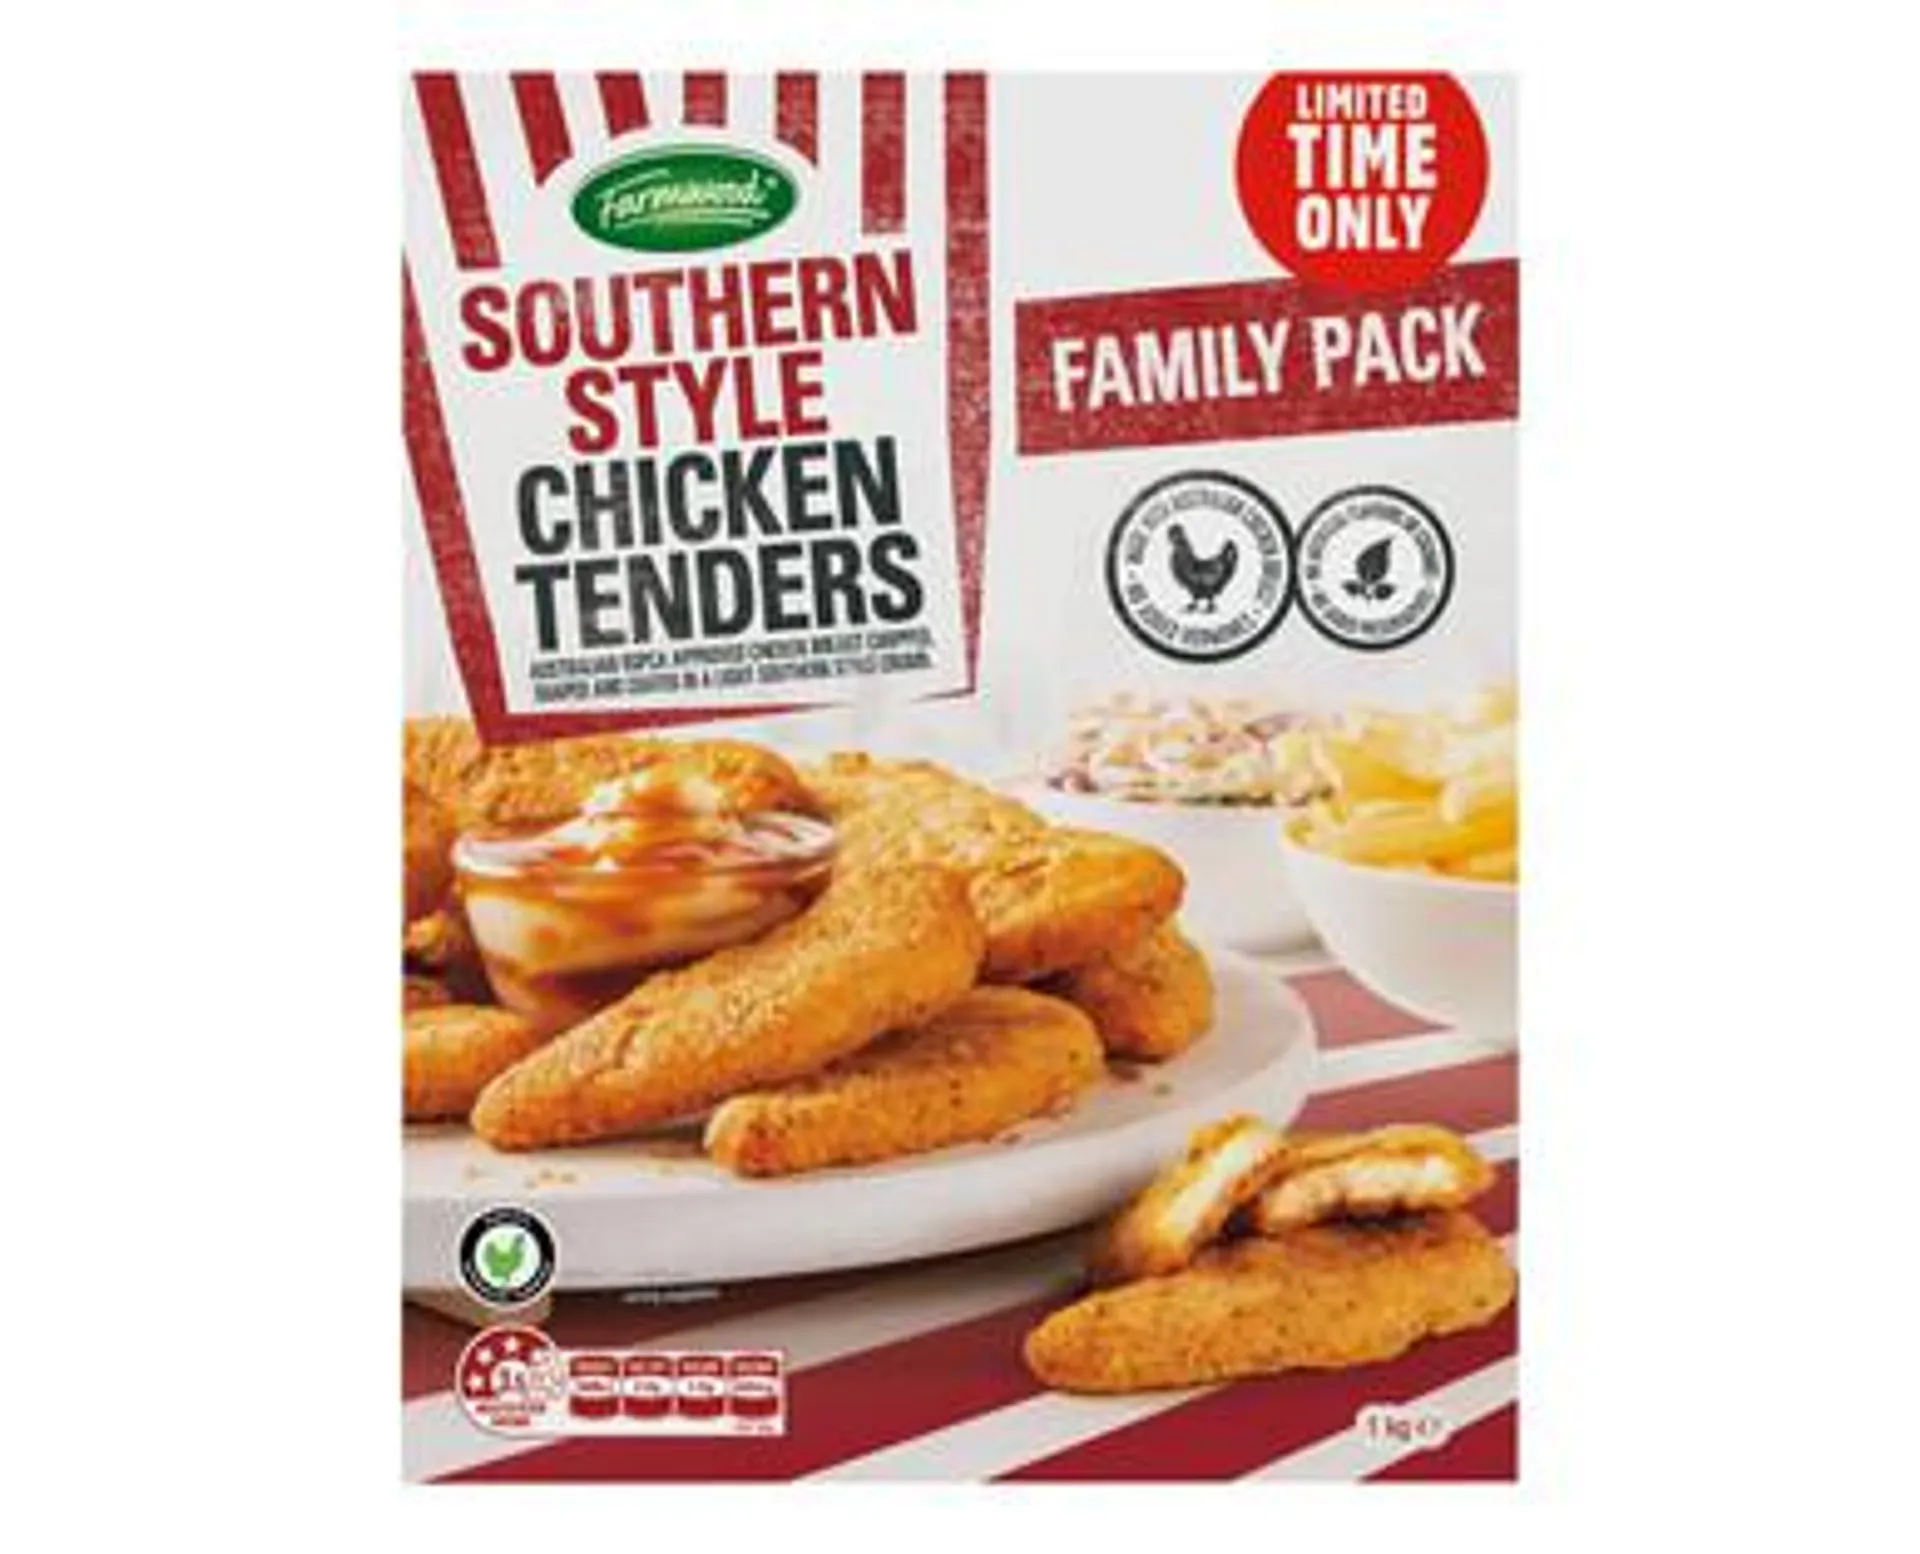 Farmwood Southern Style Chicken Tenders 1kg